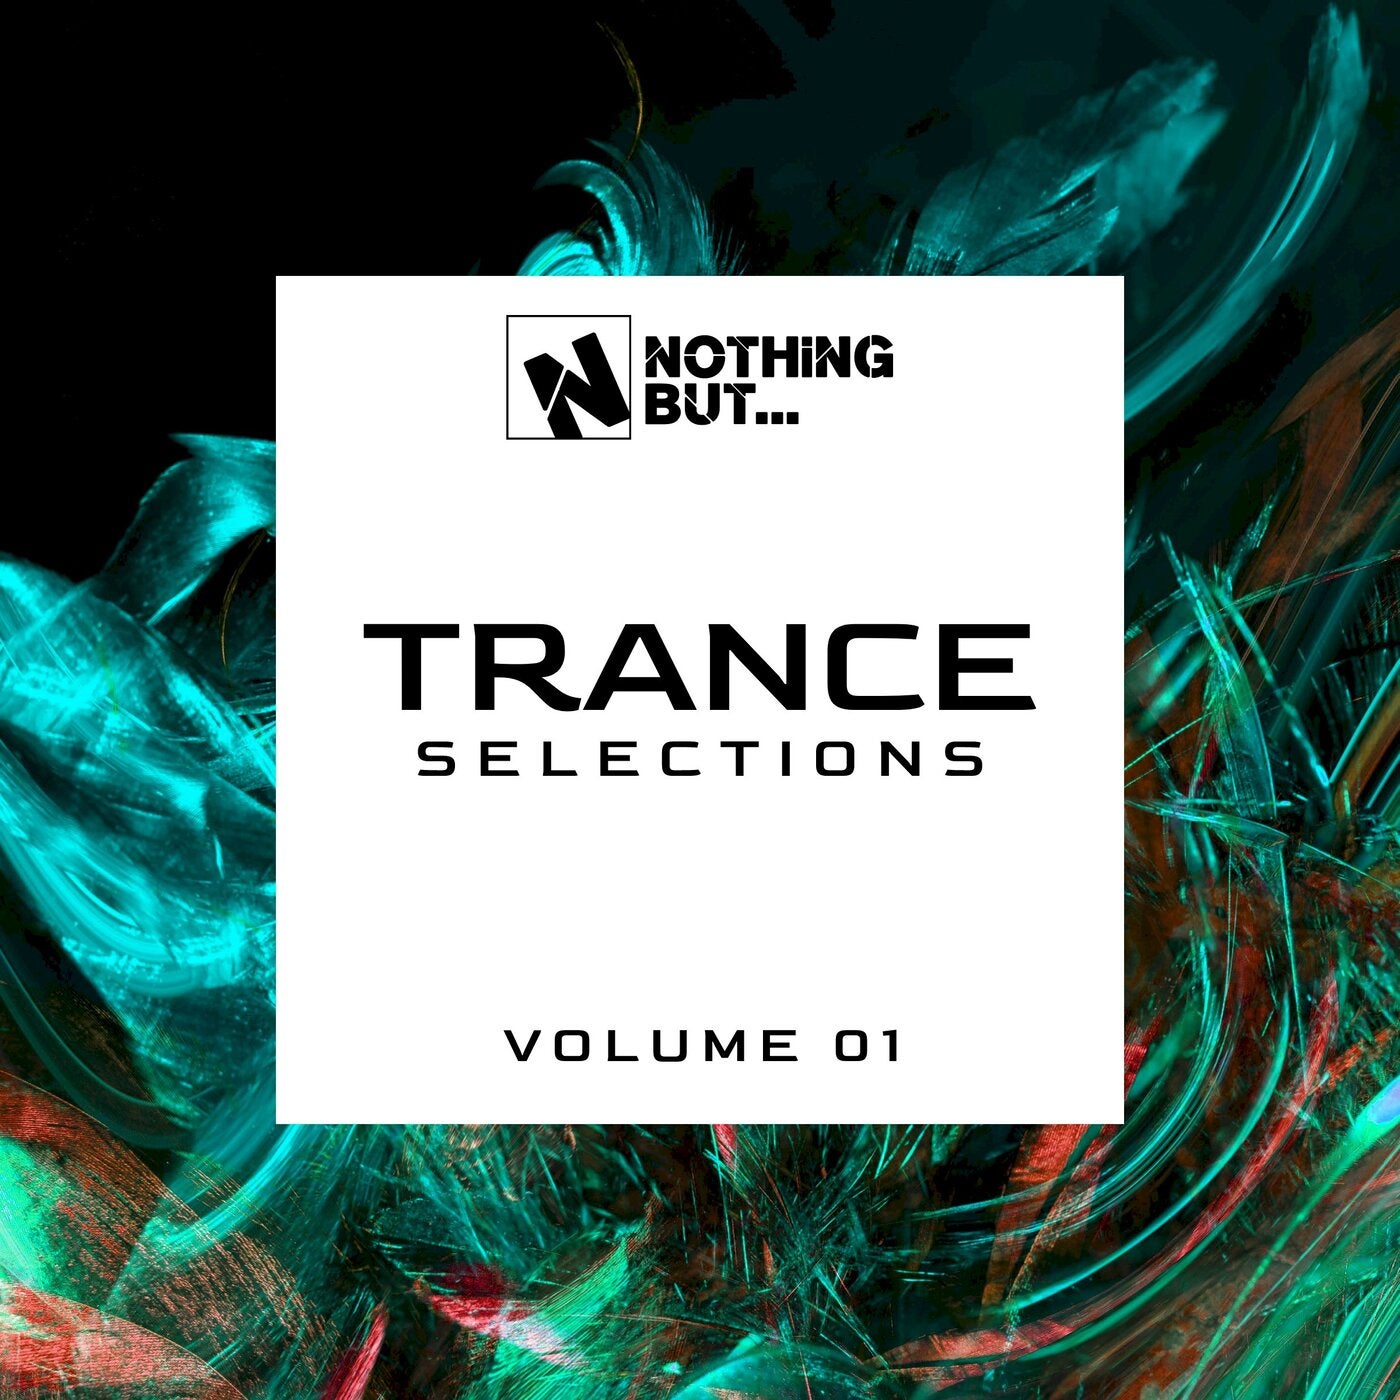 Nothing But... Trance Selections, Vol. 01